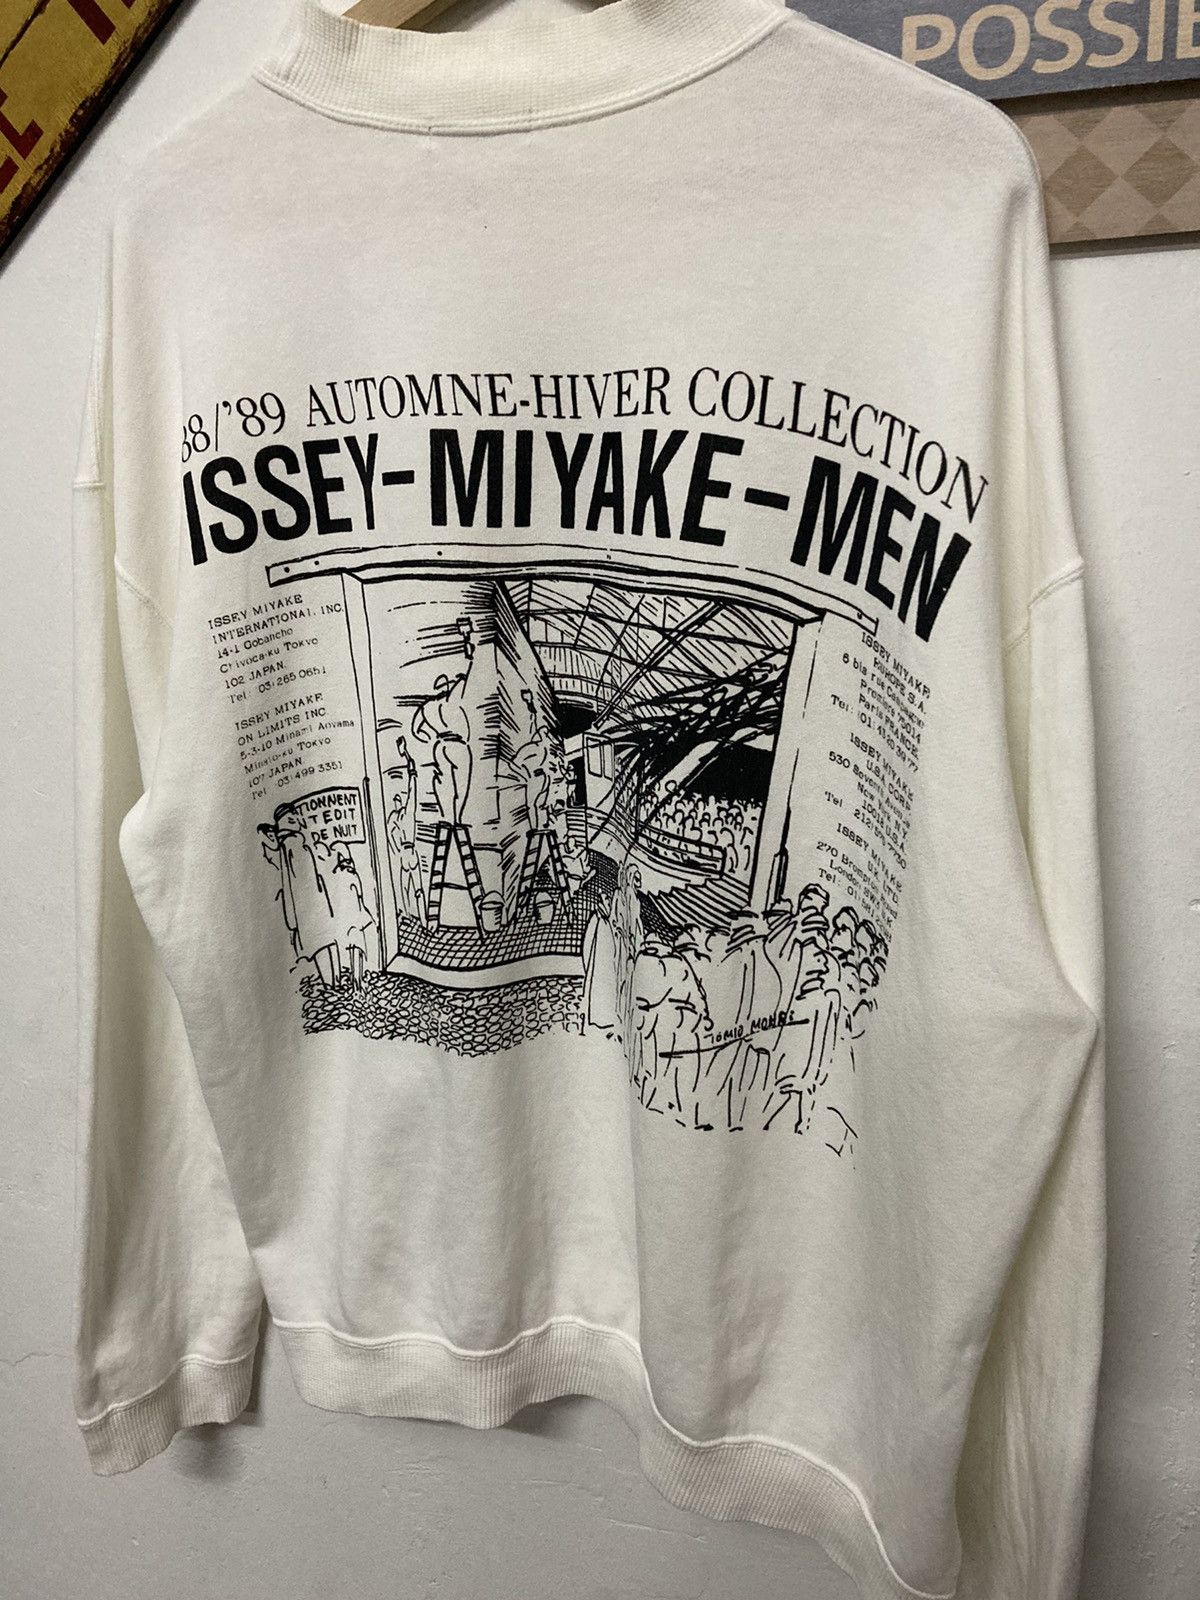 RARE Vintage 88/89 Issey Miyake Men Automne Hiver Collection - 7